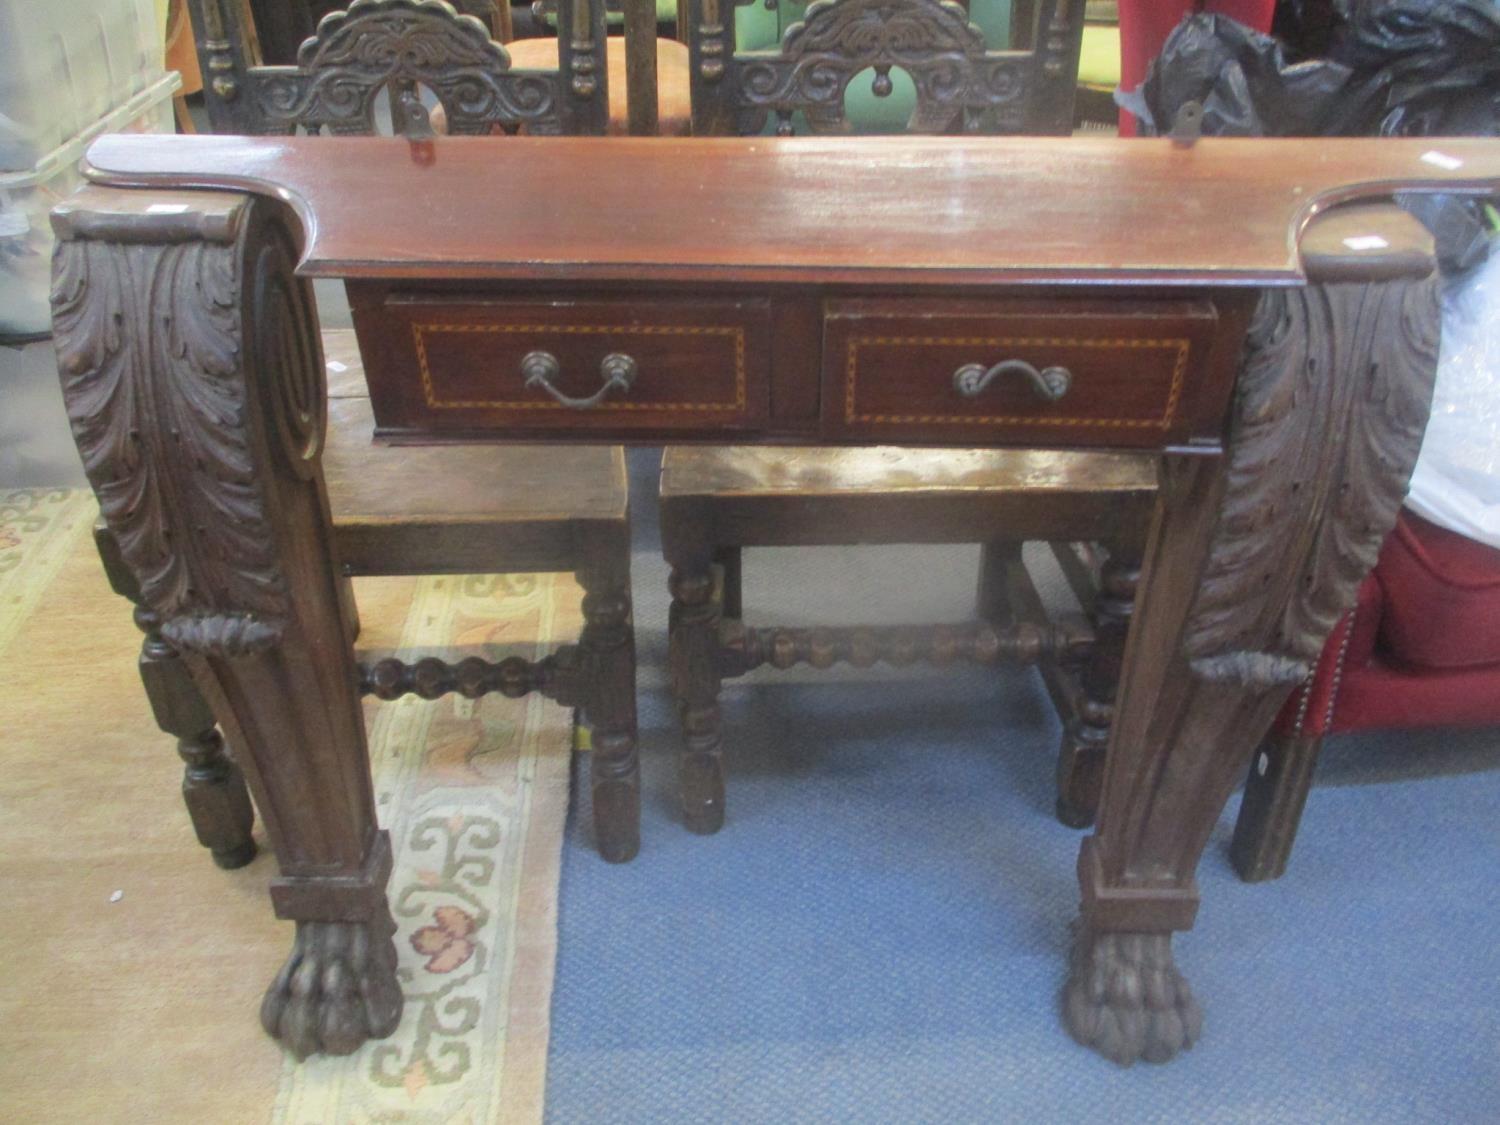 A pair of table legs having acanthus leaf decoration and lion paw feet, together with a set of